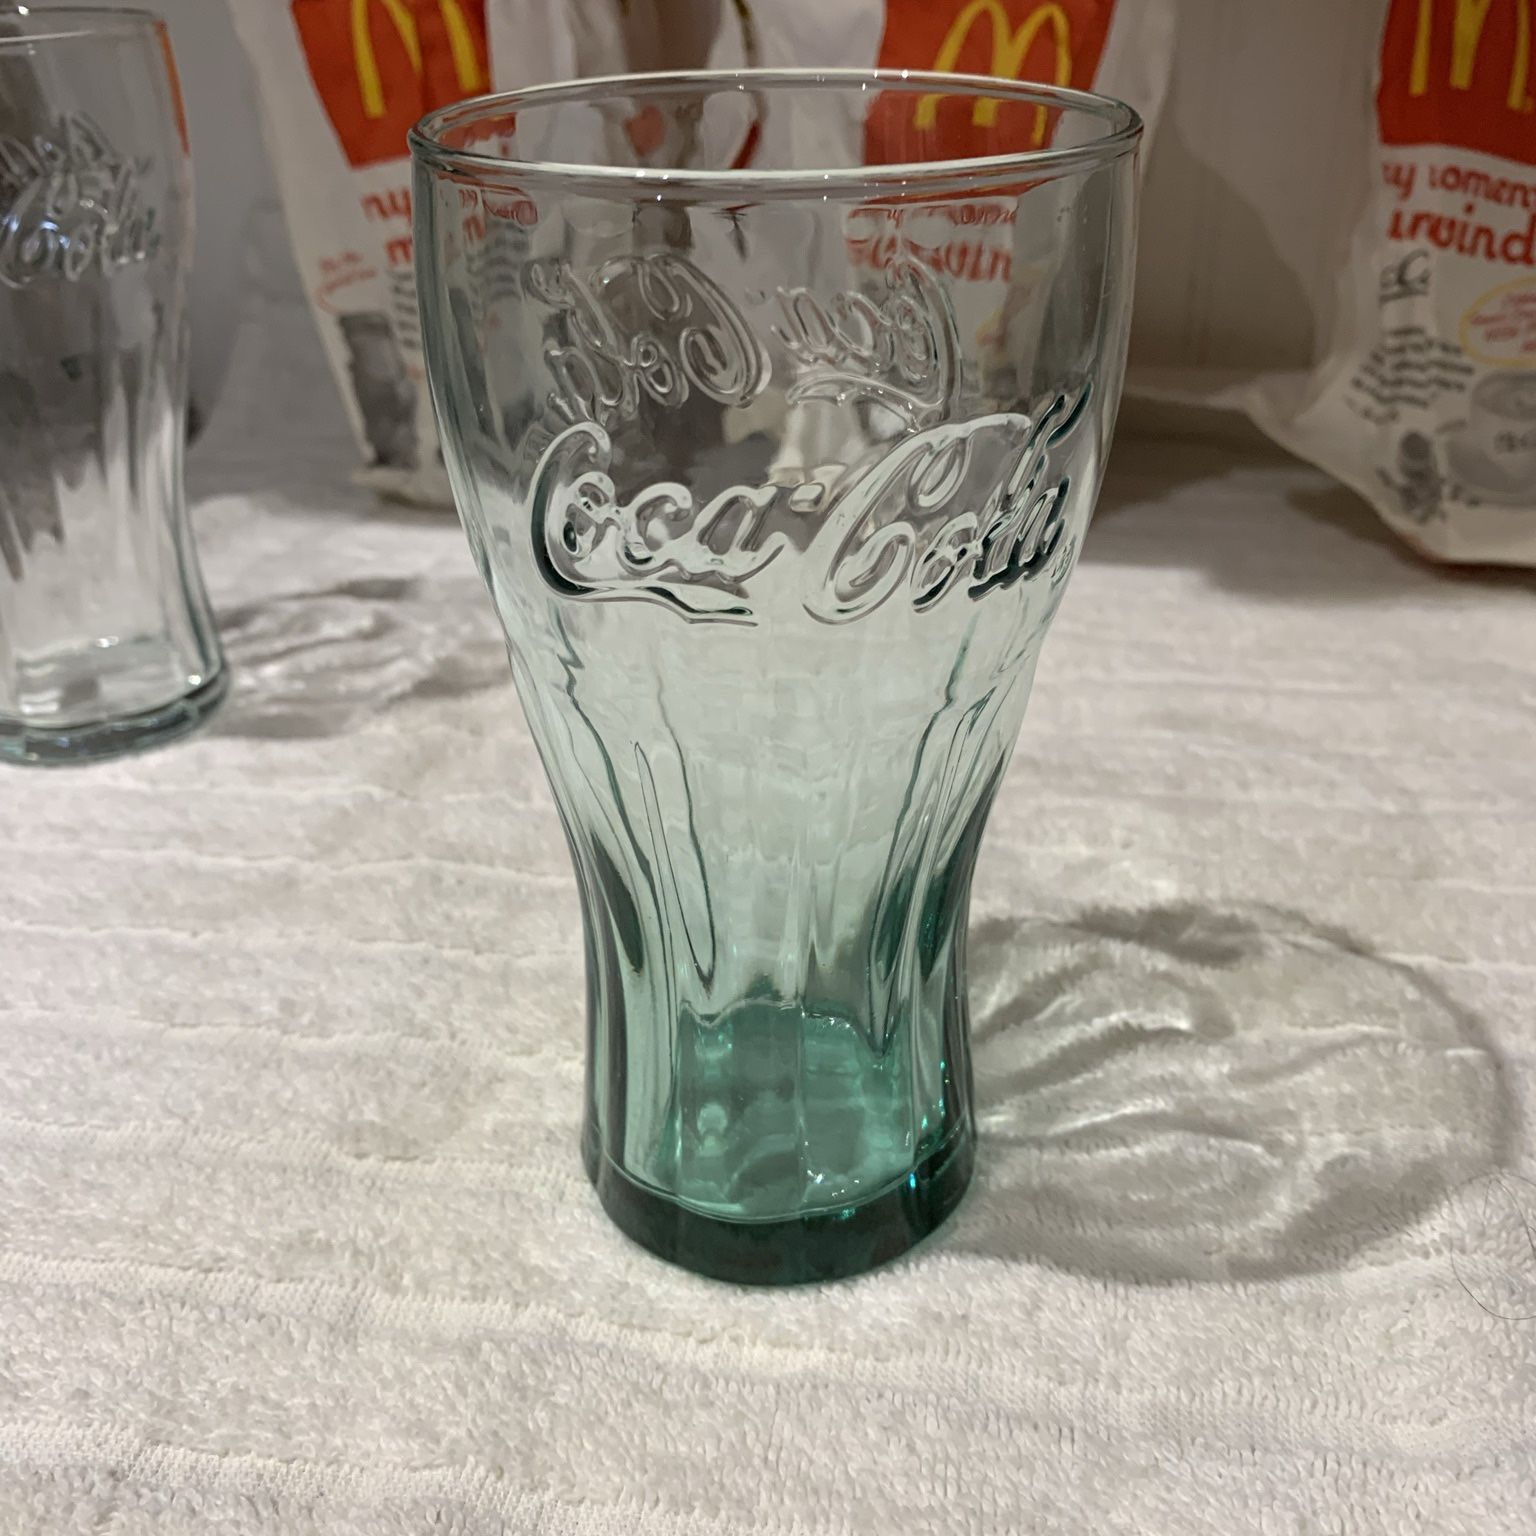 Brand New Coca Cola Coke Glasses Set Of 4 McDonalds Collectibles for Sale  in West Covina, CA - OfferUp